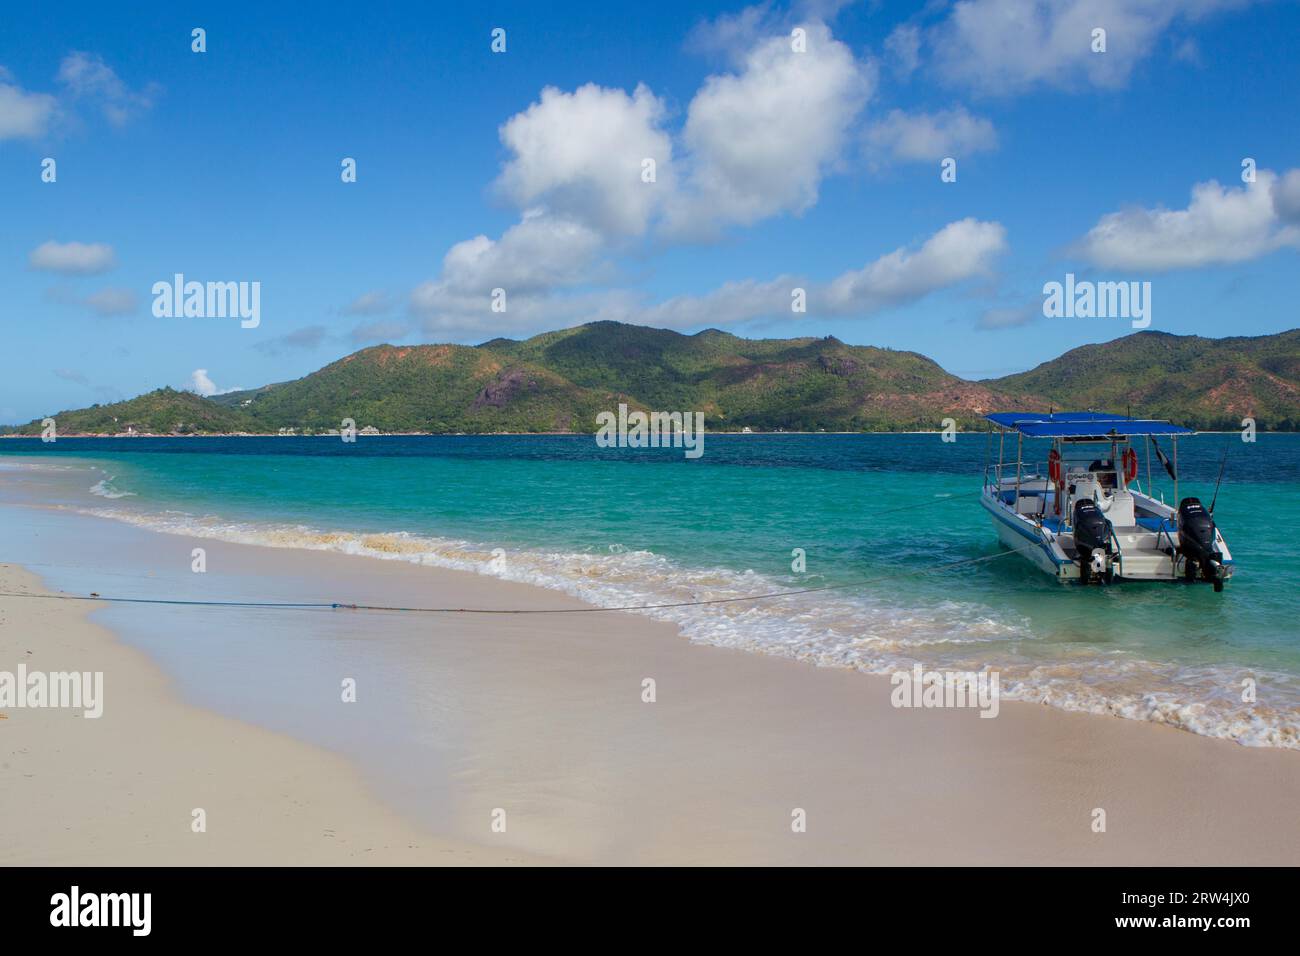 Excursion boats on Curieuse beach overlooking Praslin, Seychelles Stock Photo